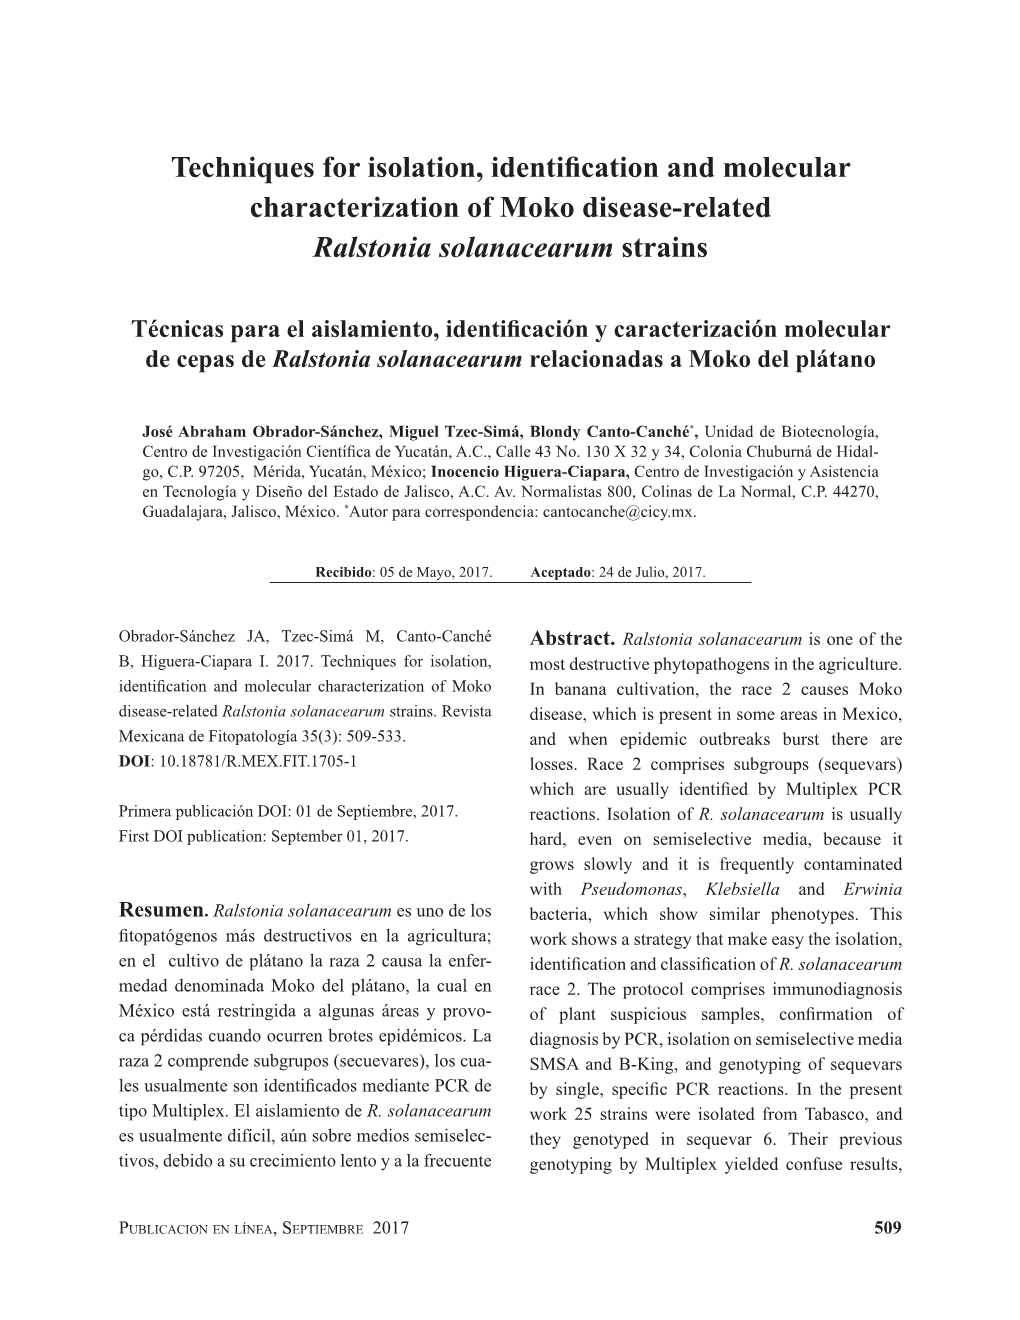 Techniques for Isolation, Identification and Molecular Characterization of Moko Disease-Related Ralstonia Solanacearum Strains